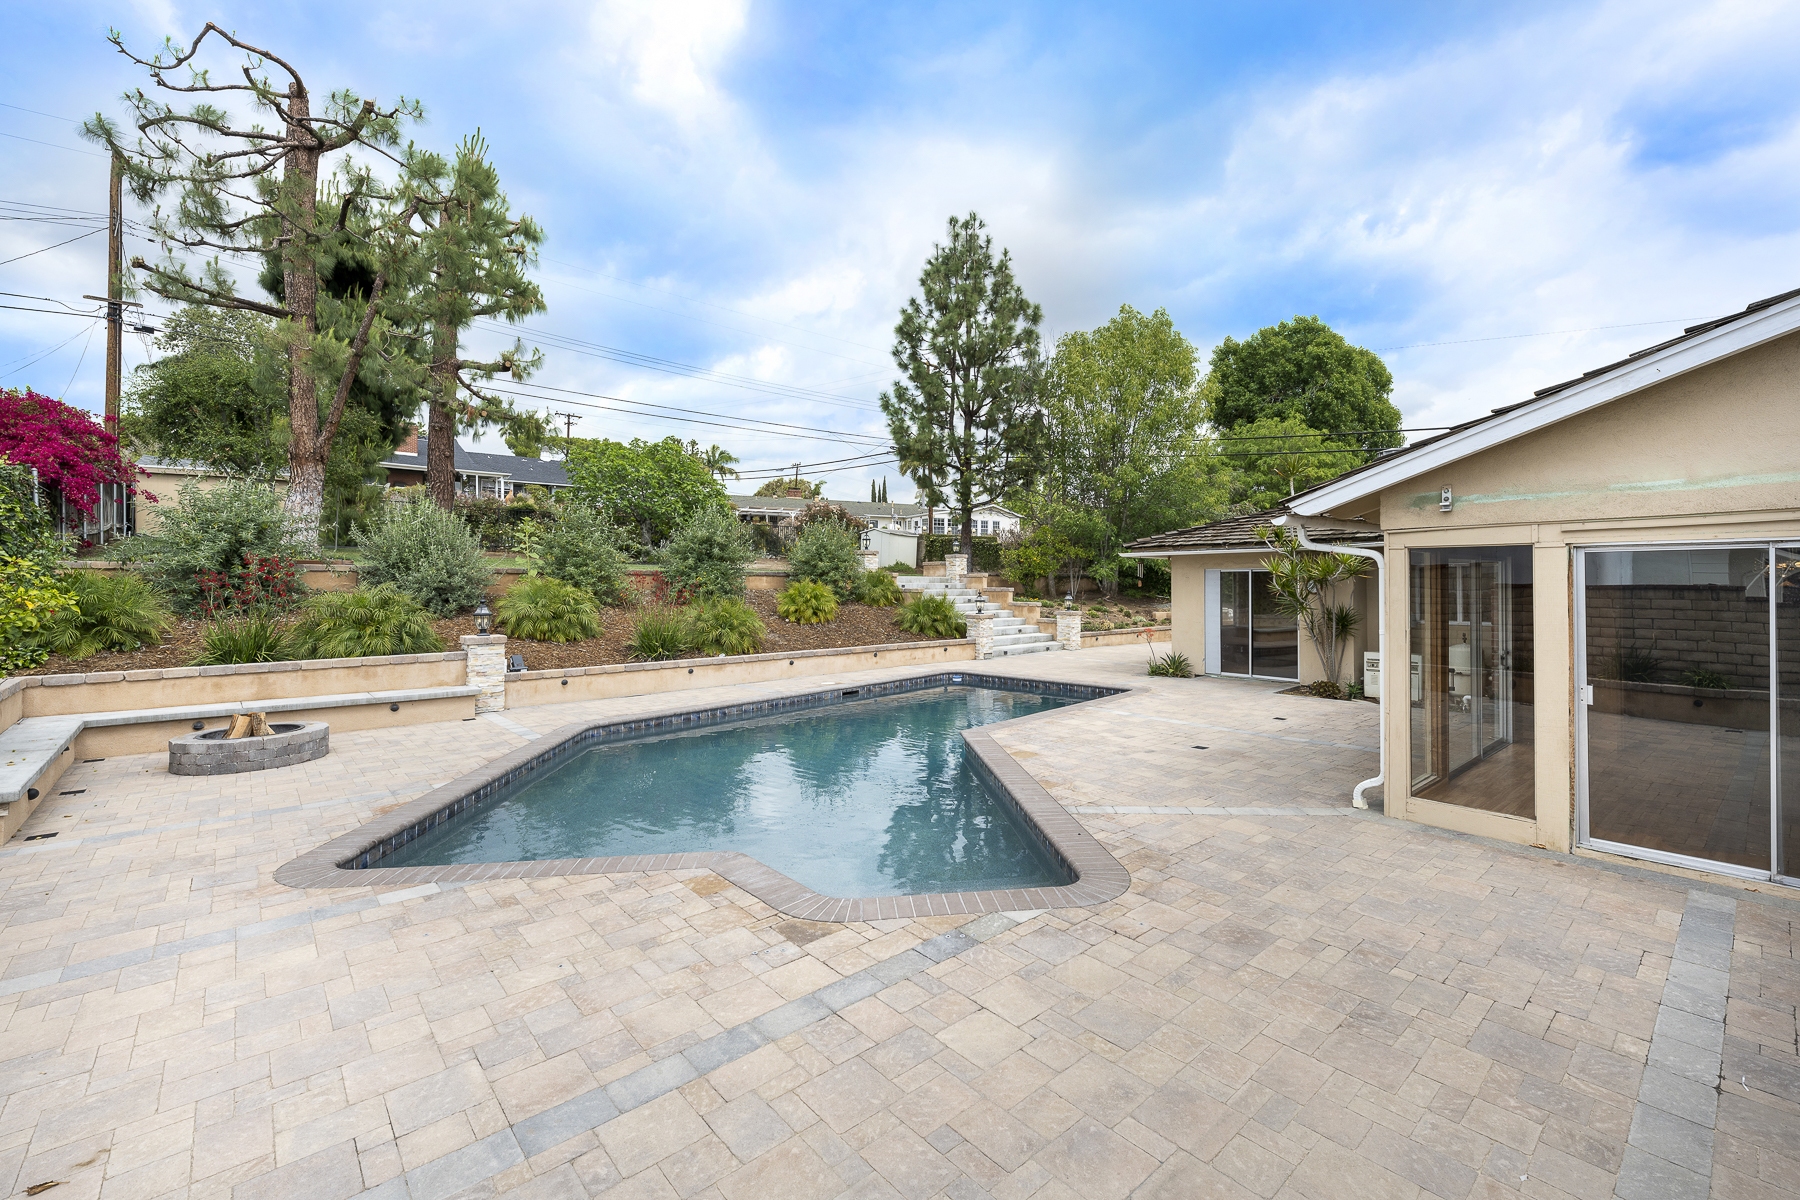 501 Dorothy Drive: Pool view facing the green space and landscape